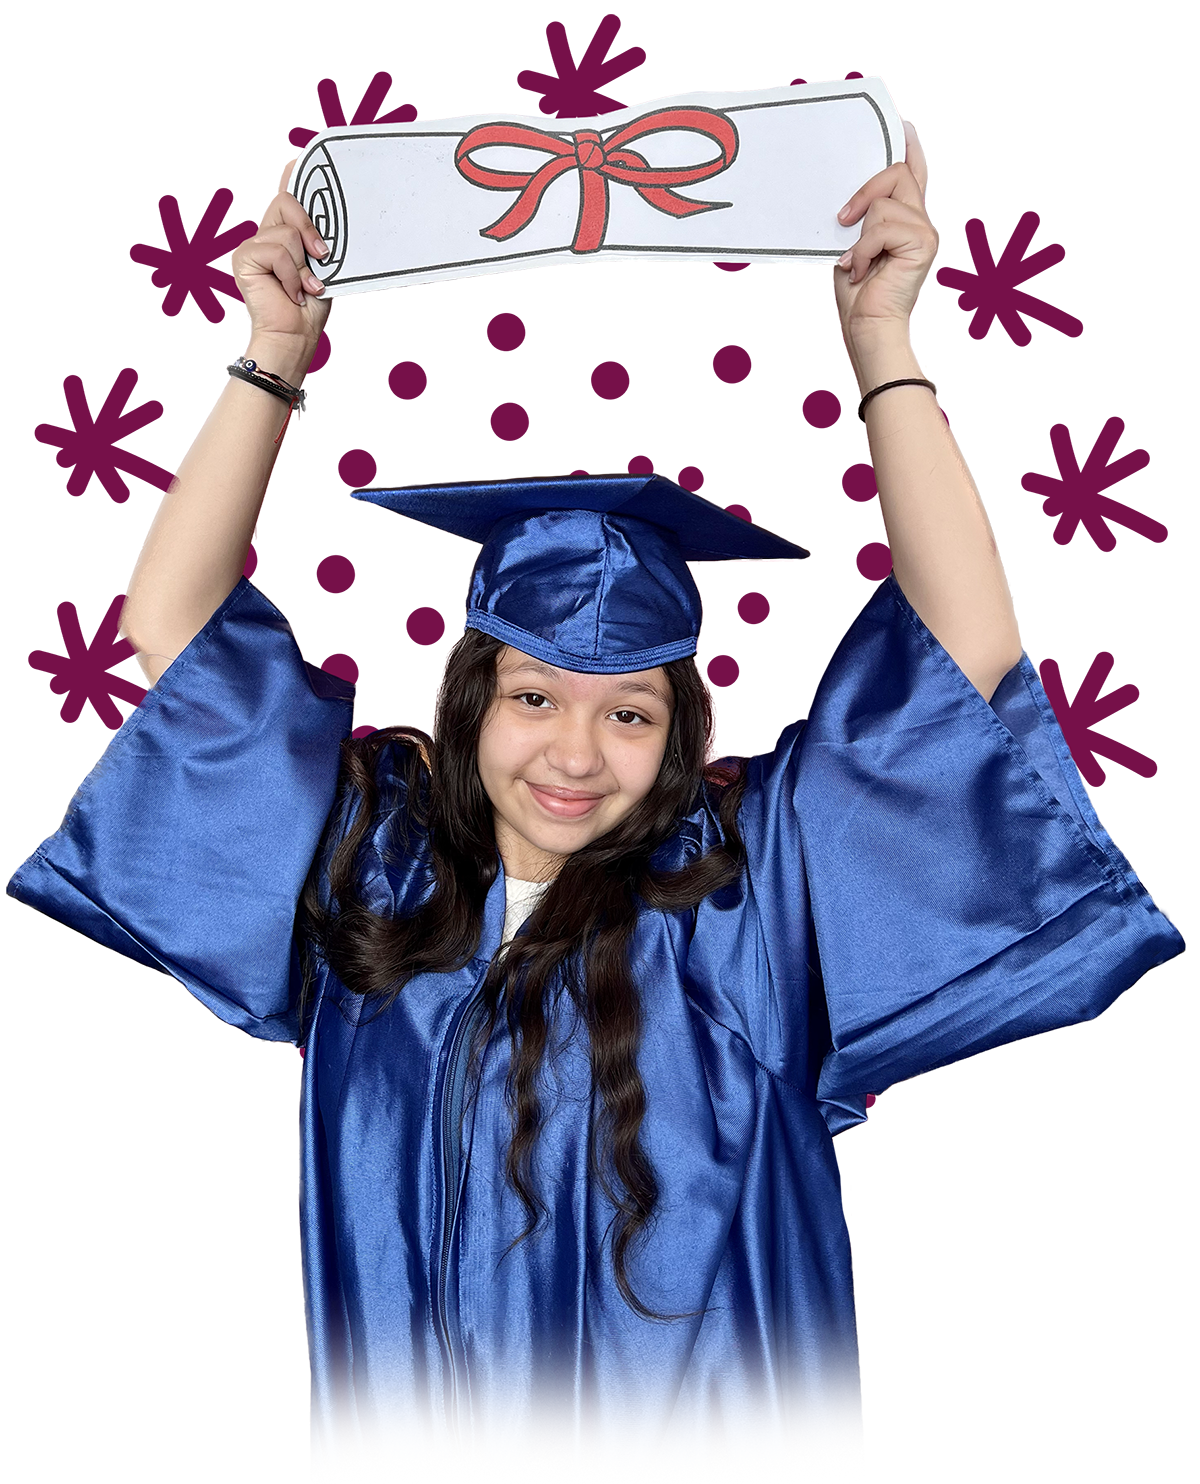 A young person wearing a cap and gown holding a diploma over their head